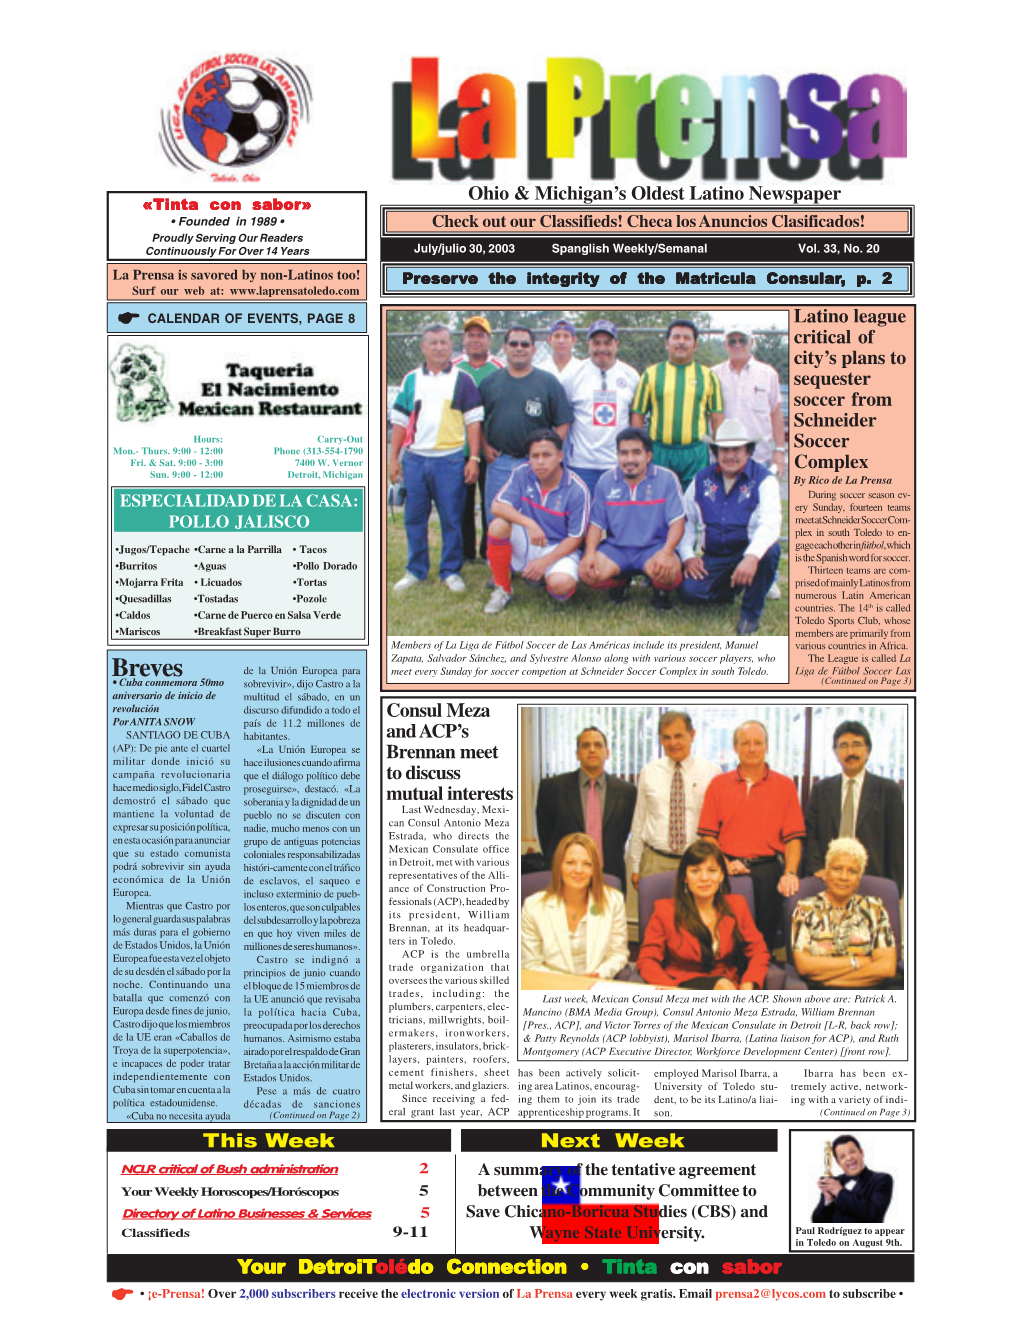 Breves De La Unión Europea Para Meet Every Sunday for Soccer Competion at Schneider Soccer Complex in South Toledo